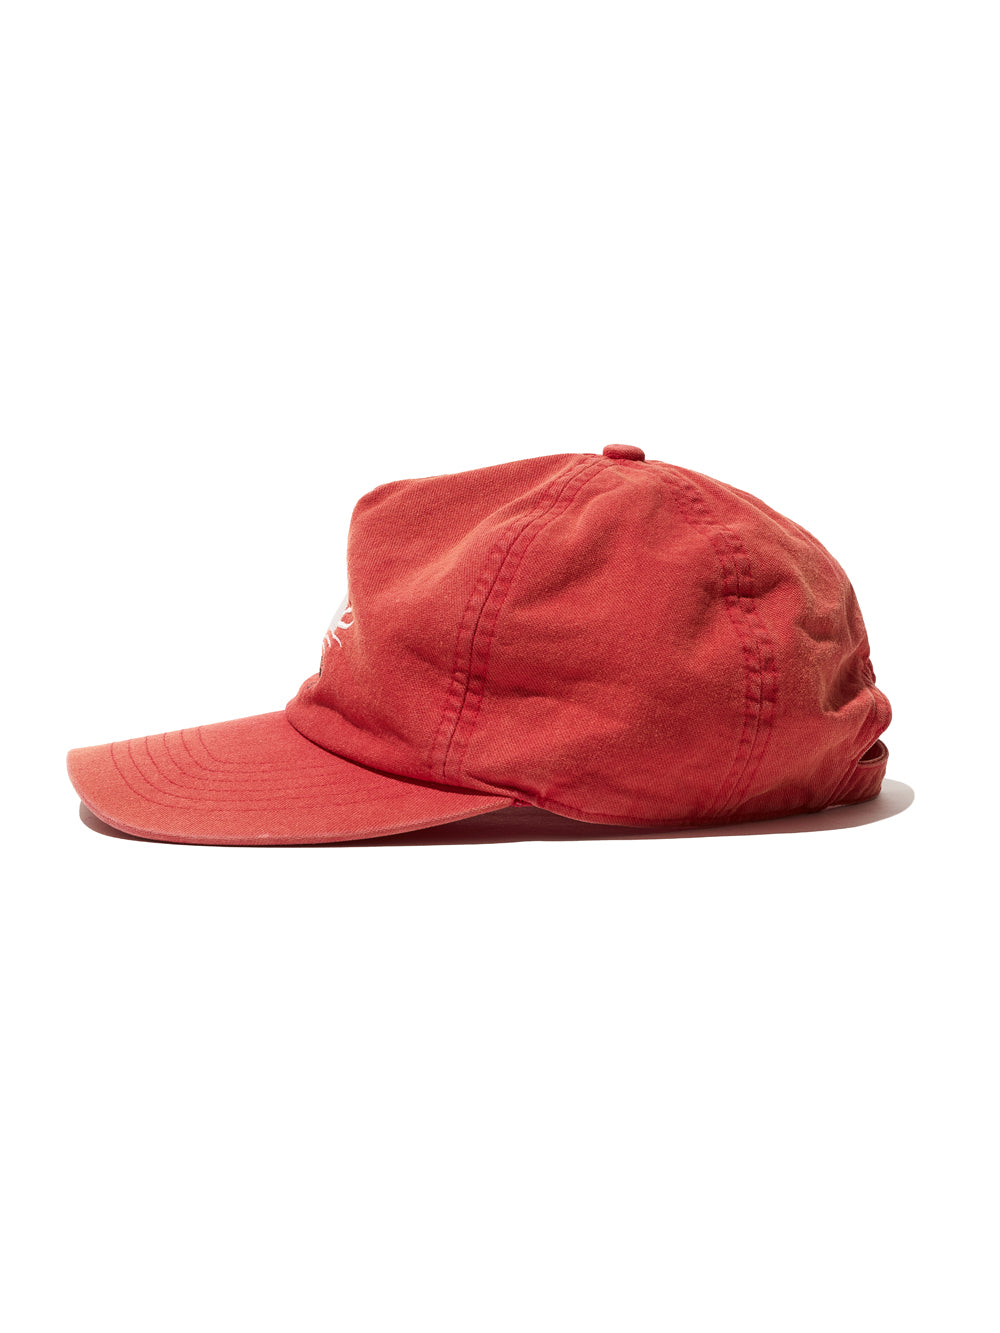 Vintage Washed Sunlight Ball Cap in Red